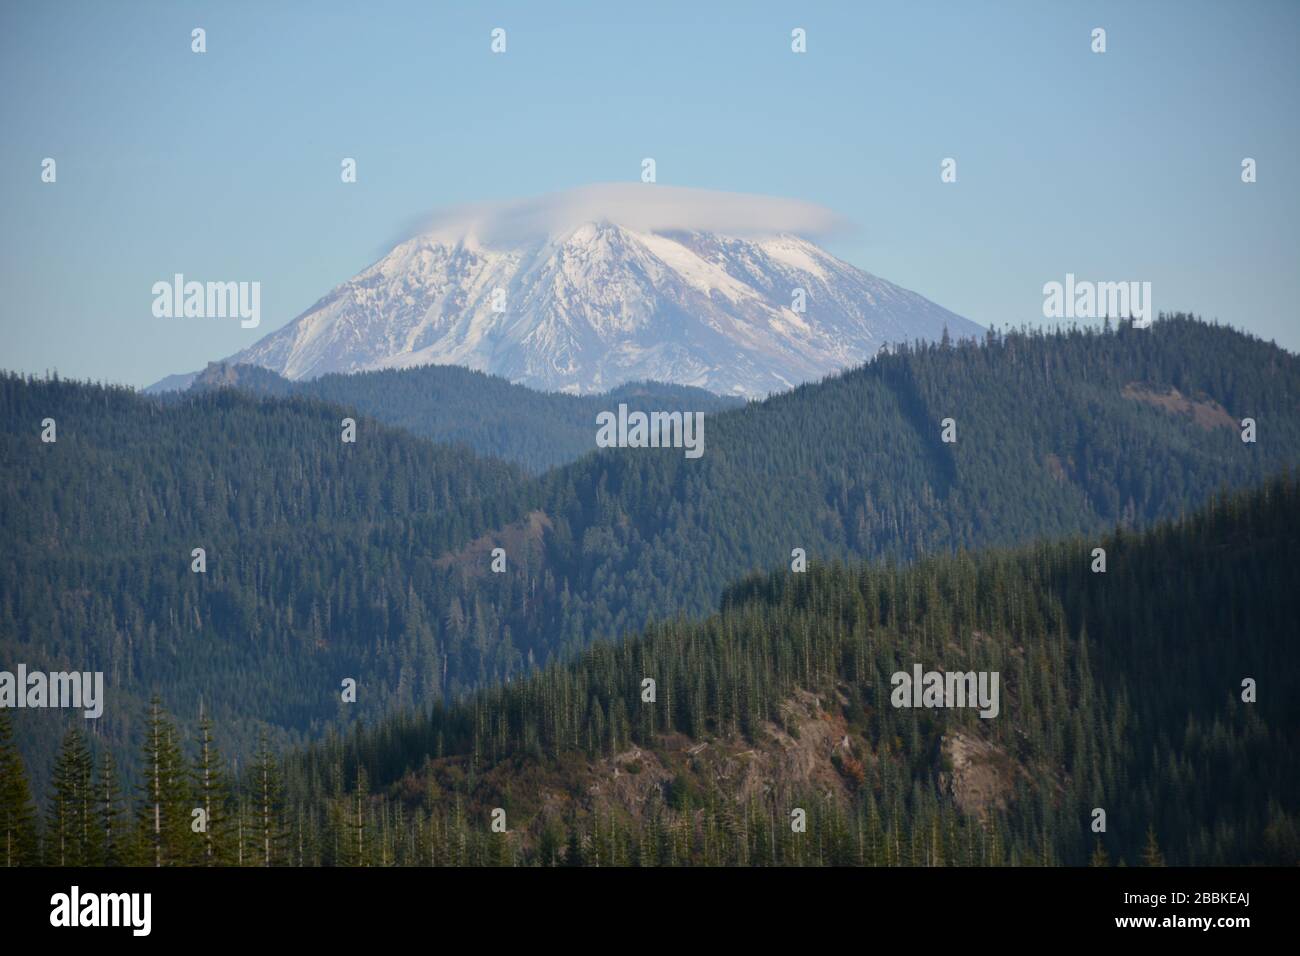 The east side of Mt St Helens seen from behind forested mountain ridges in the Gifford Pinchot National Forest,, Washington State, USA. Stock Photo